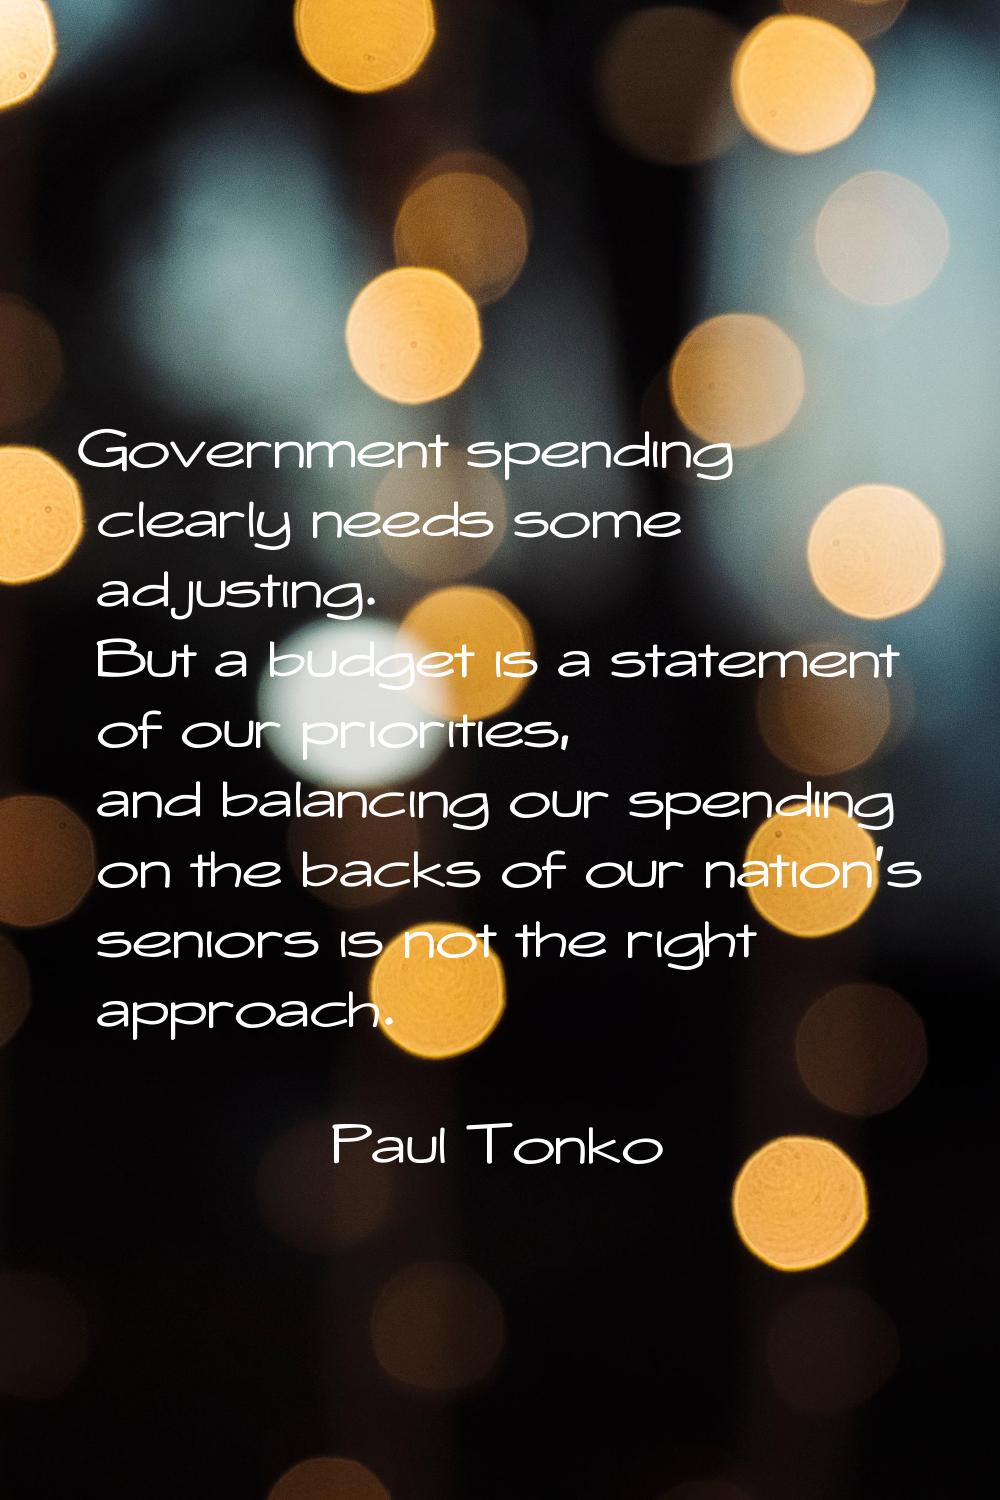 Government spending clearly needs some adjusting. But a budget is a statement of our priorities, an